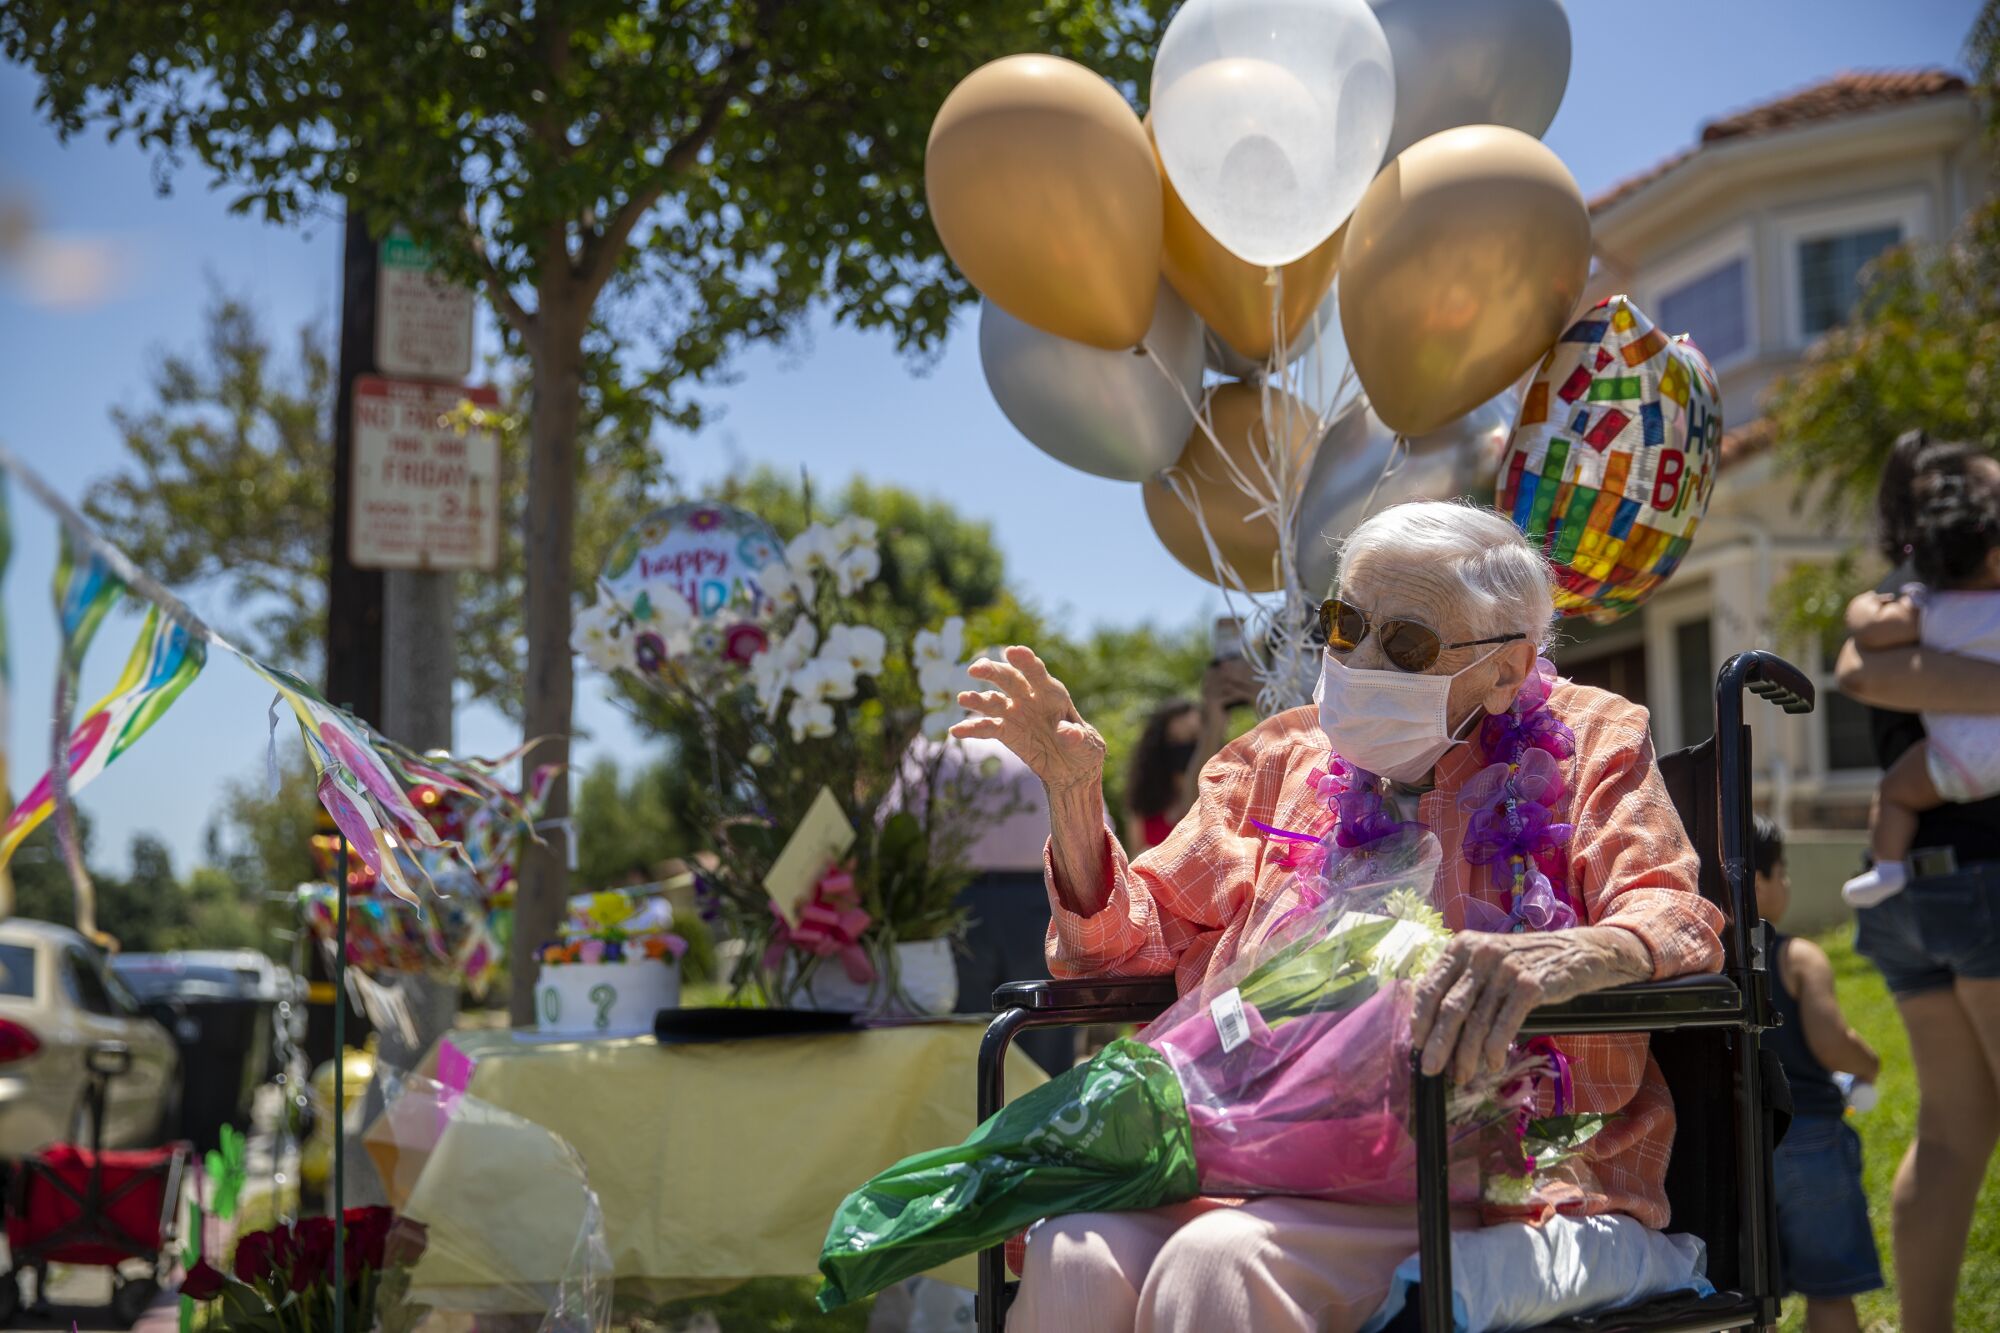 Mildred "Millie" Stratton waves at a caravan of cars celebrating her 102nd birthday.